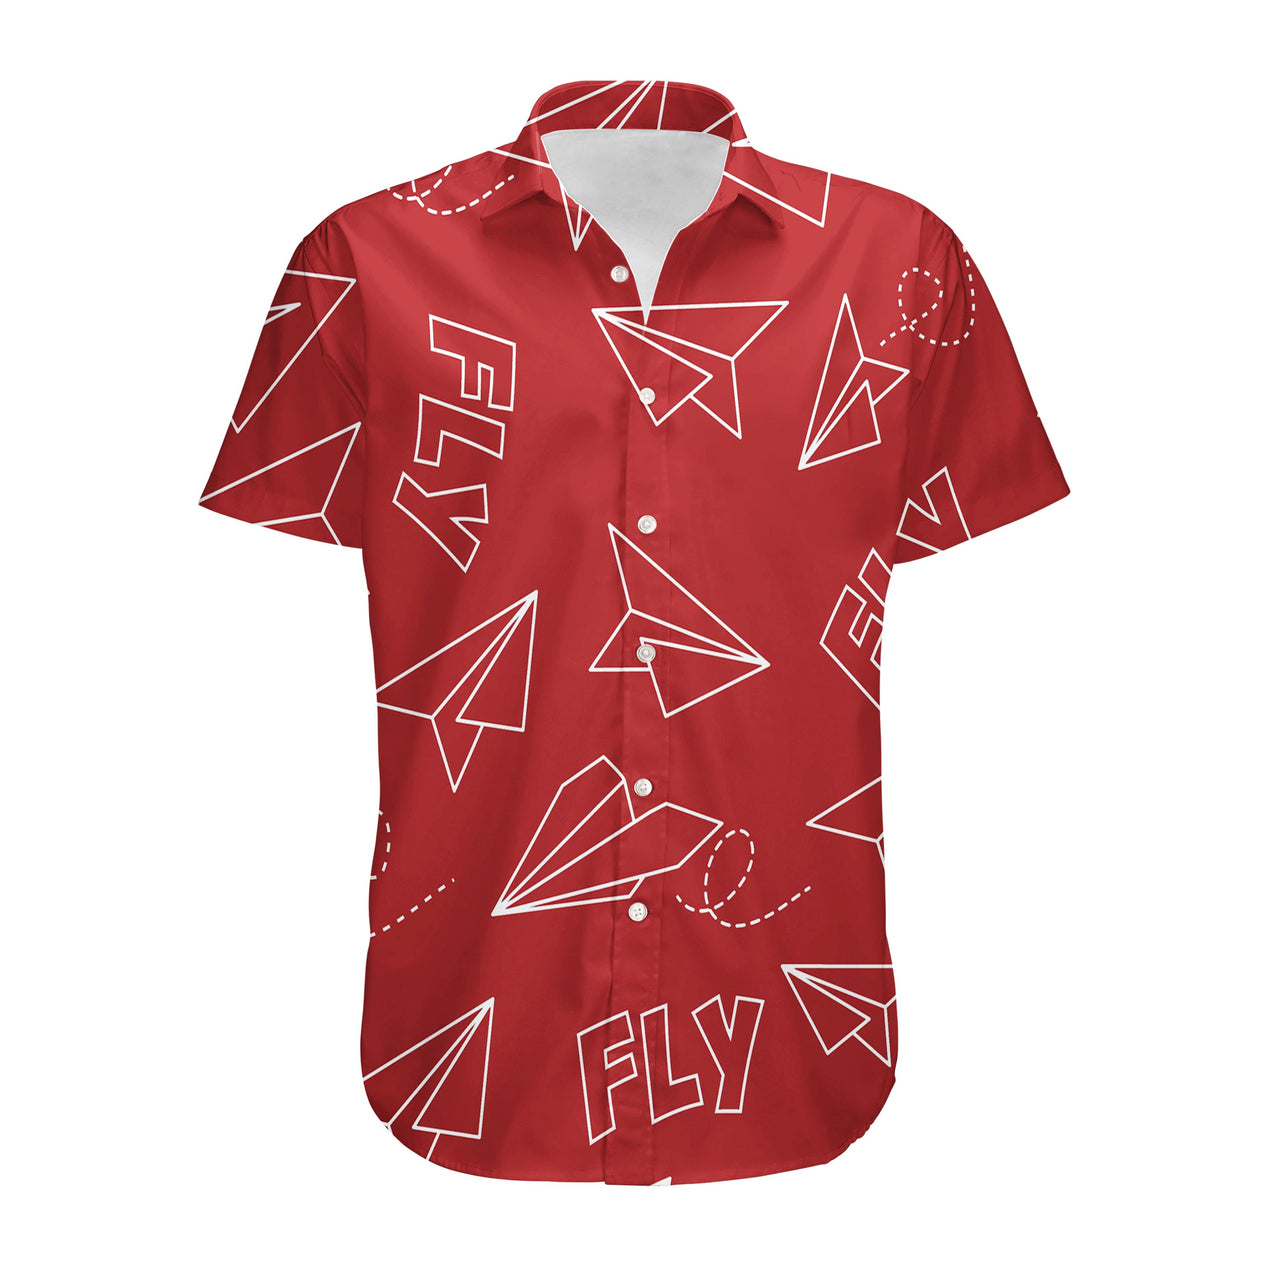 Paper Airplane & Fly (Red) Designed 3D Shirts